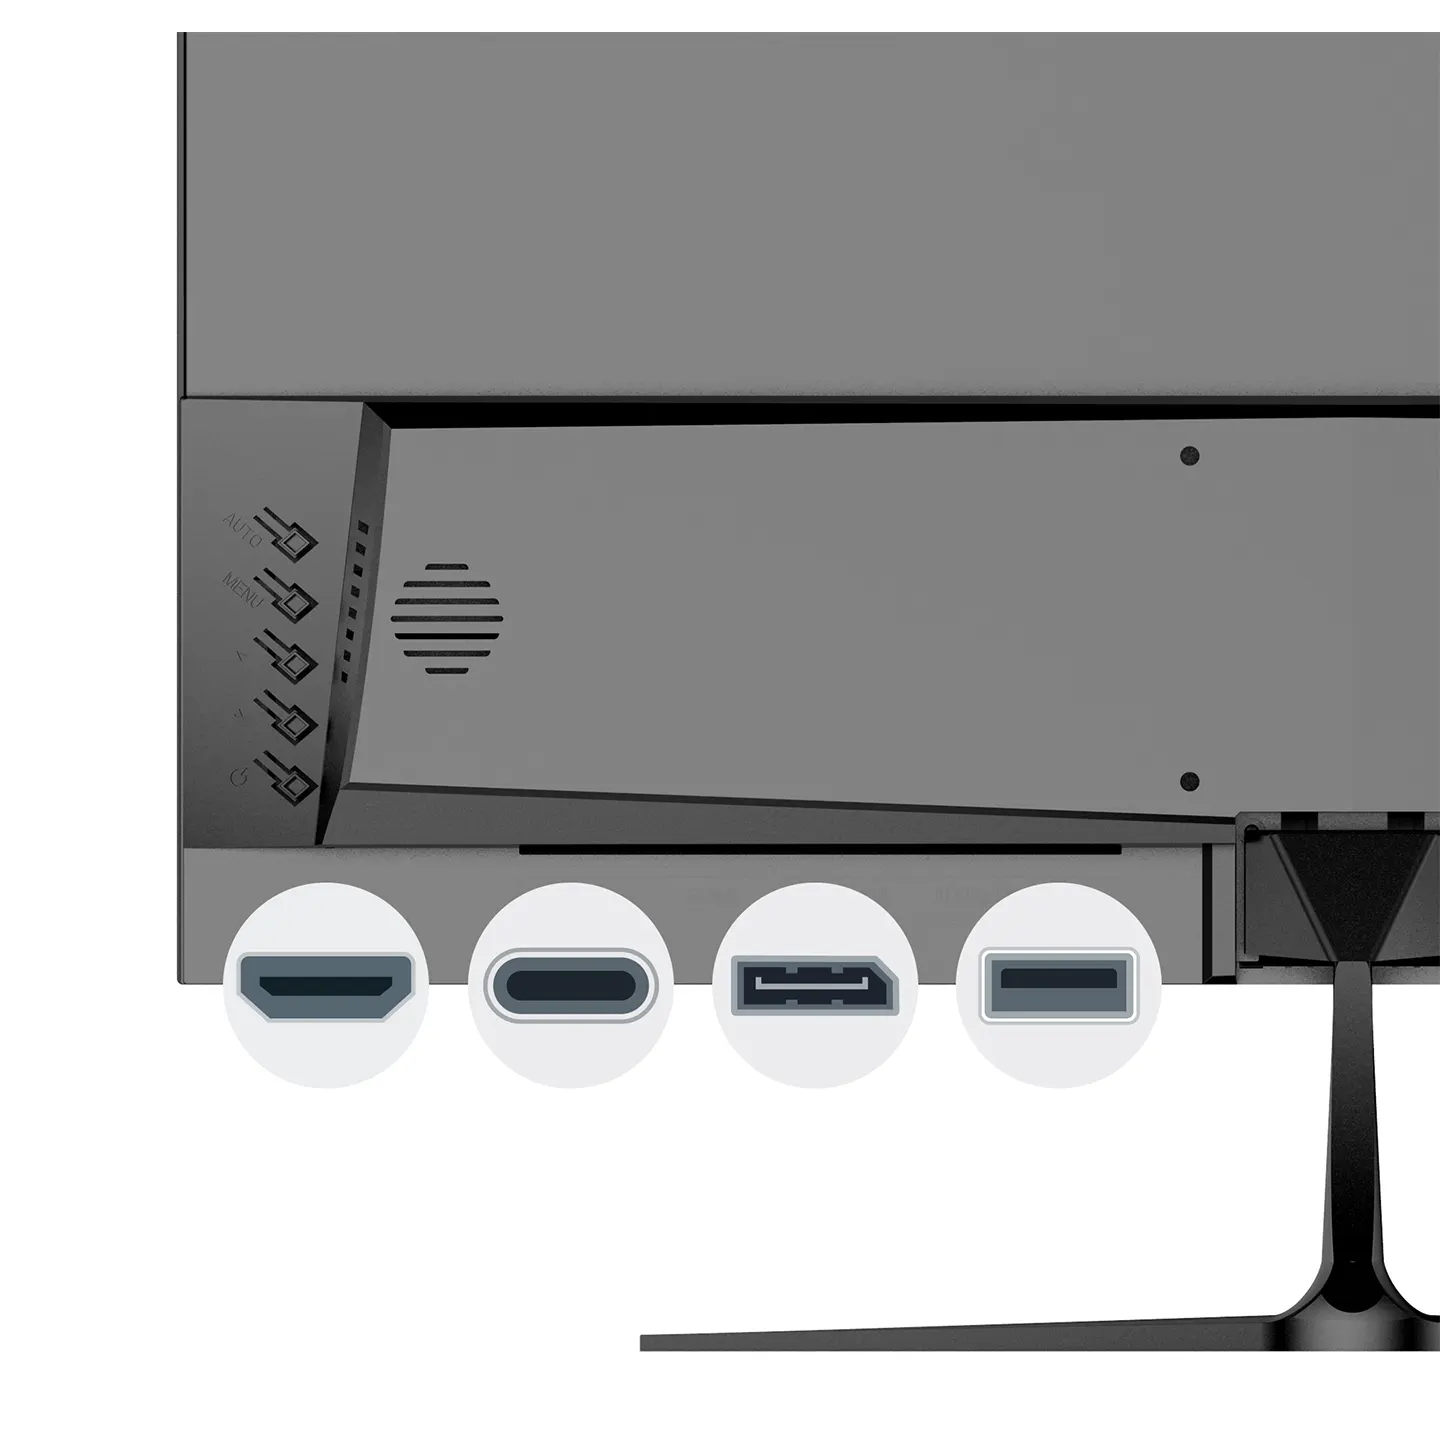 PC monitor connections